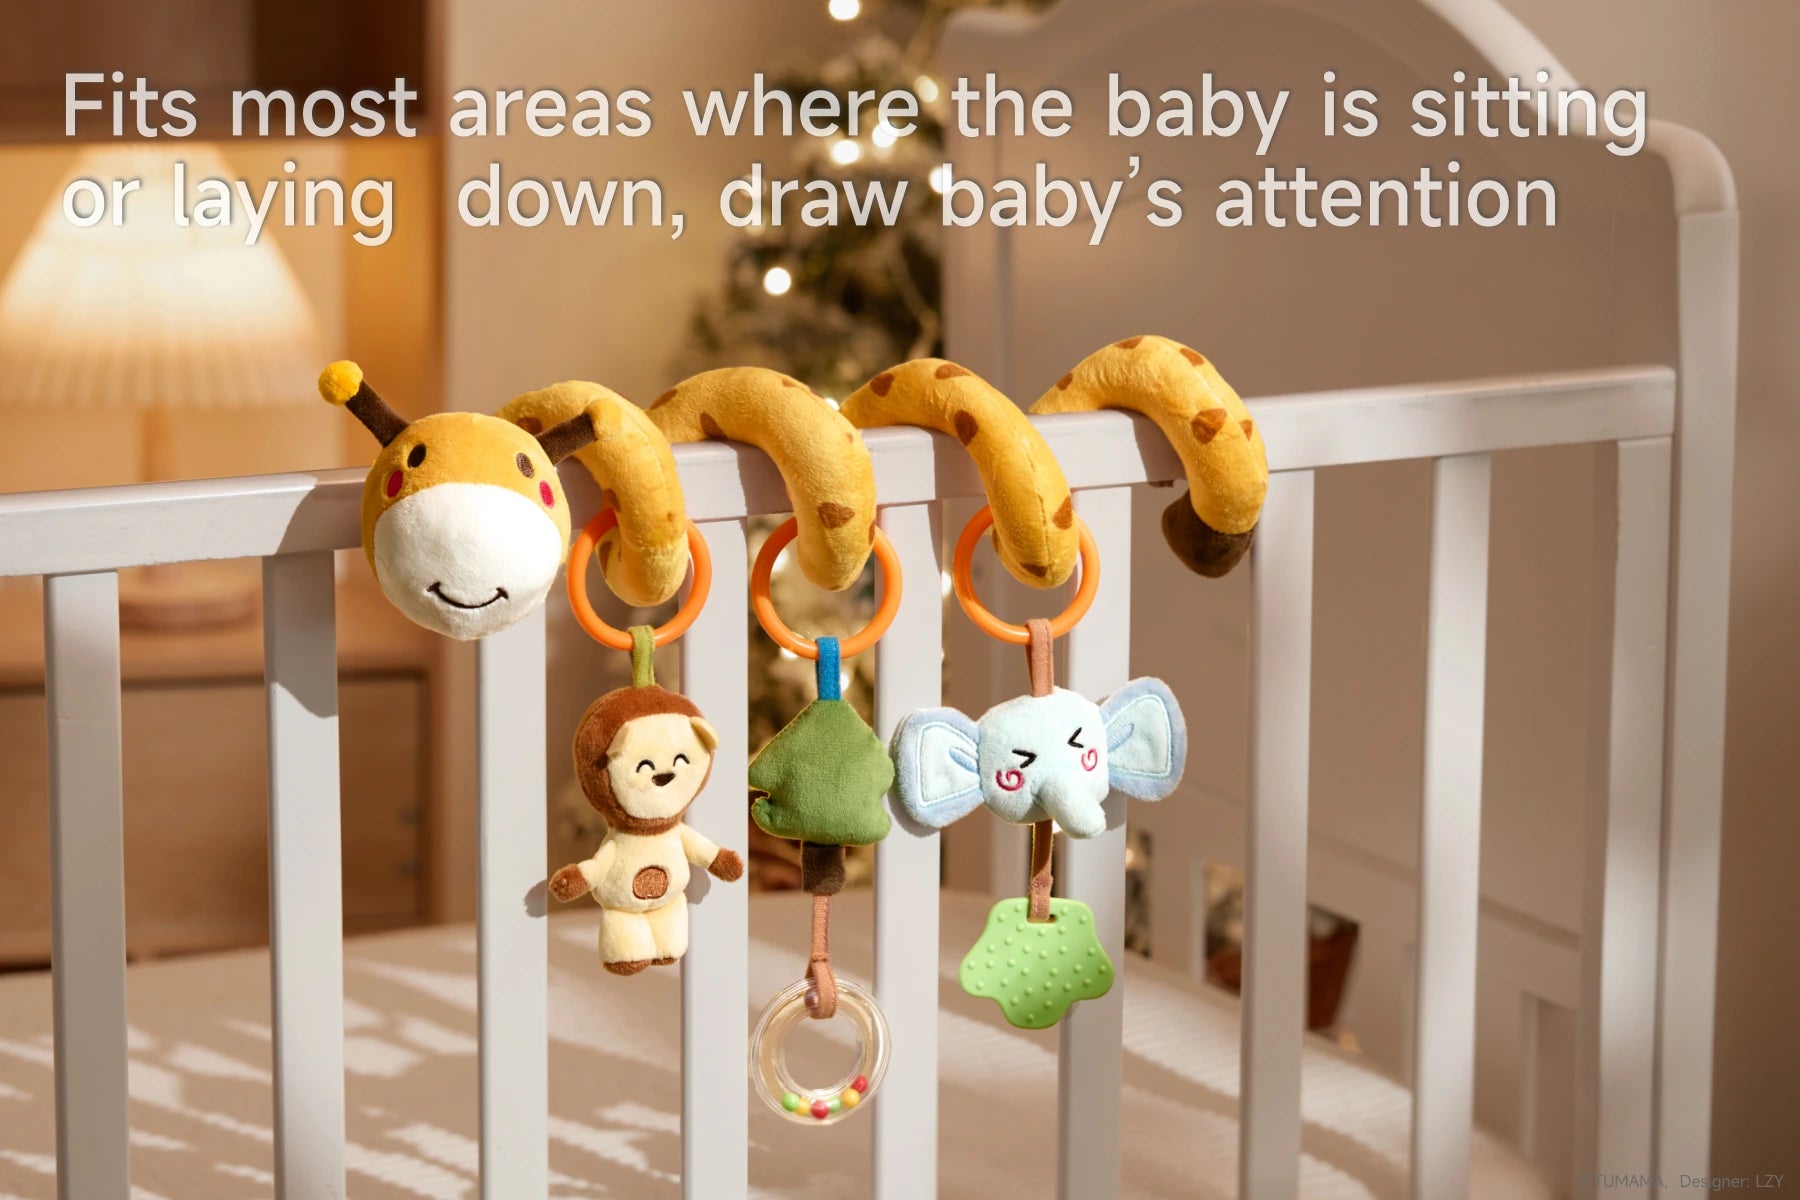 Interactive animal arch toys for baby_s enjoyment